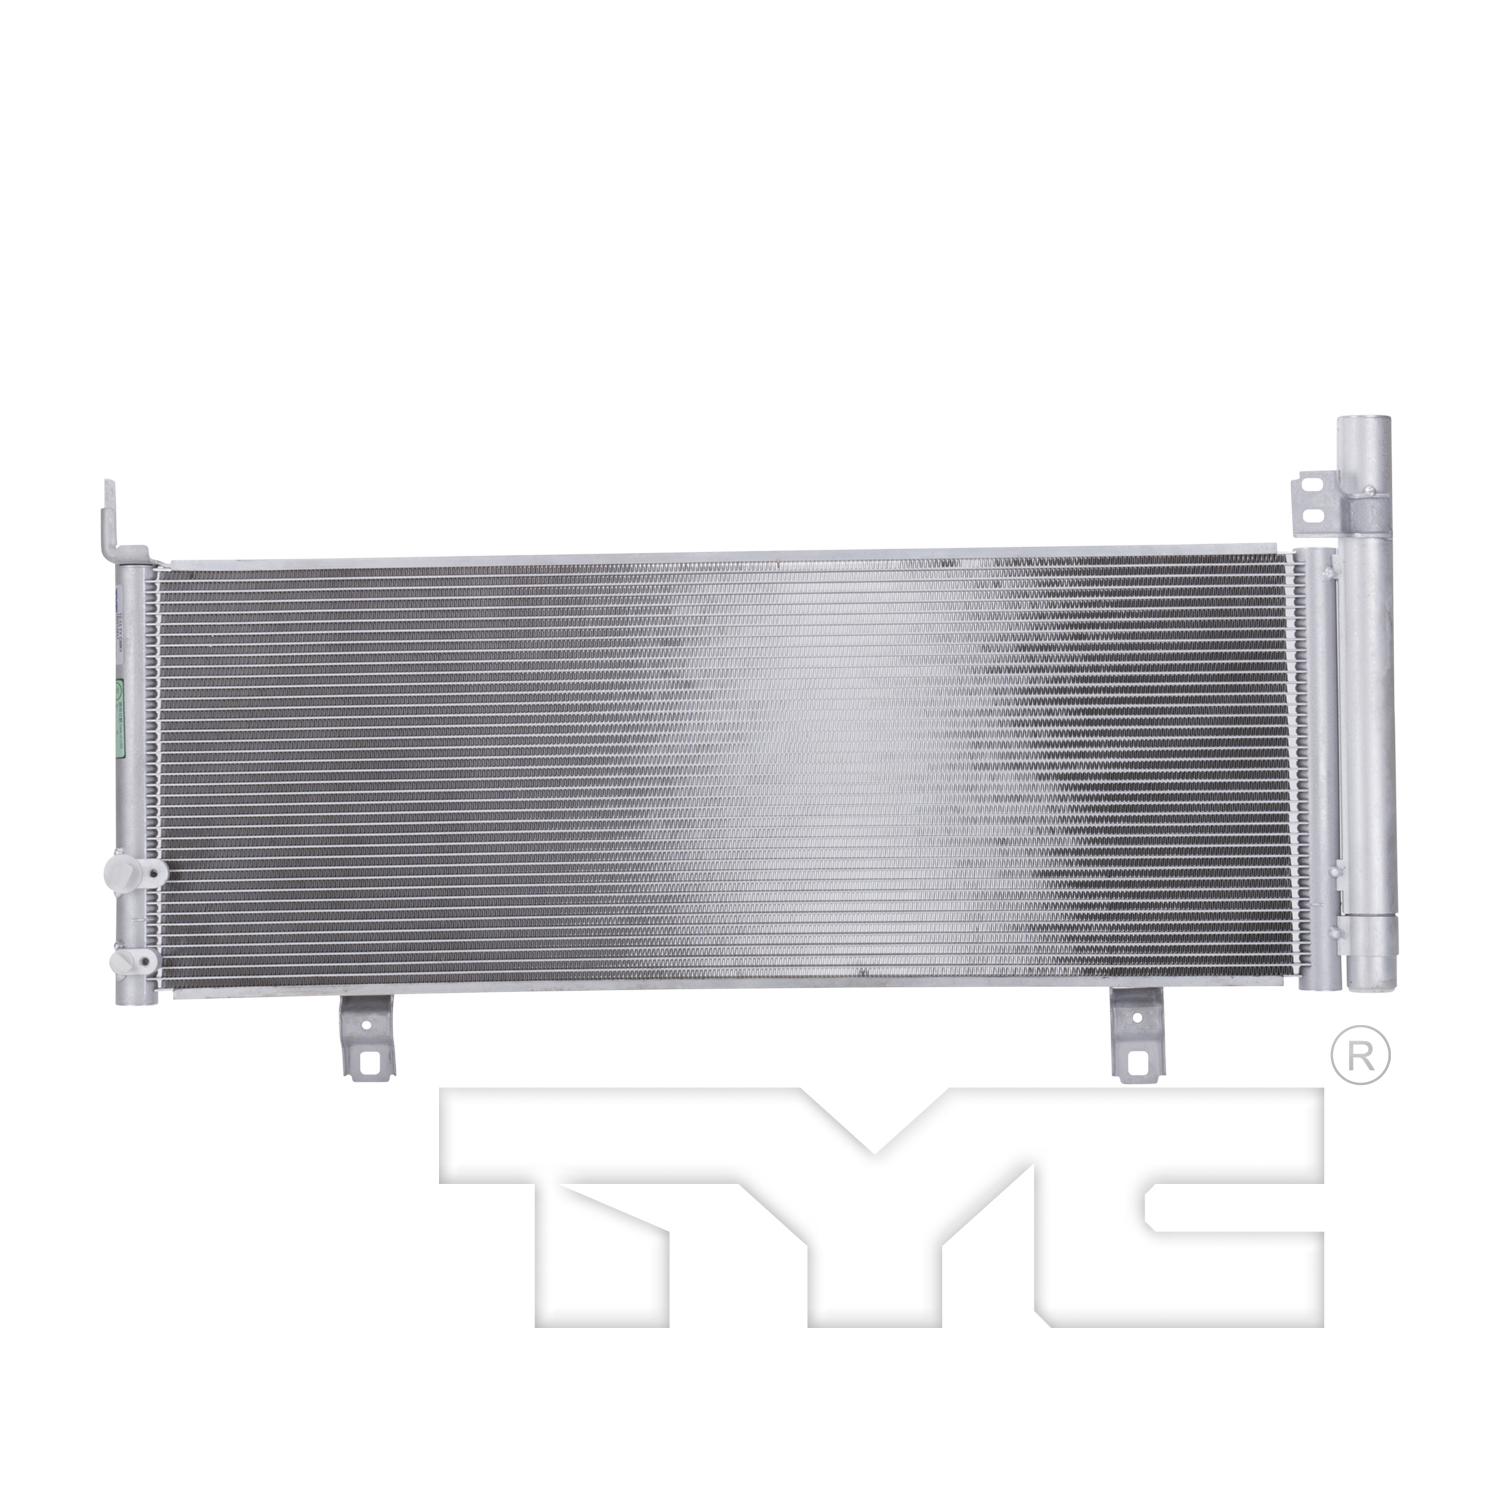 Aftermarket AC CONDENSERS for TOYOTA - AVALON, AVALON,13-18,Air conditioning condenser